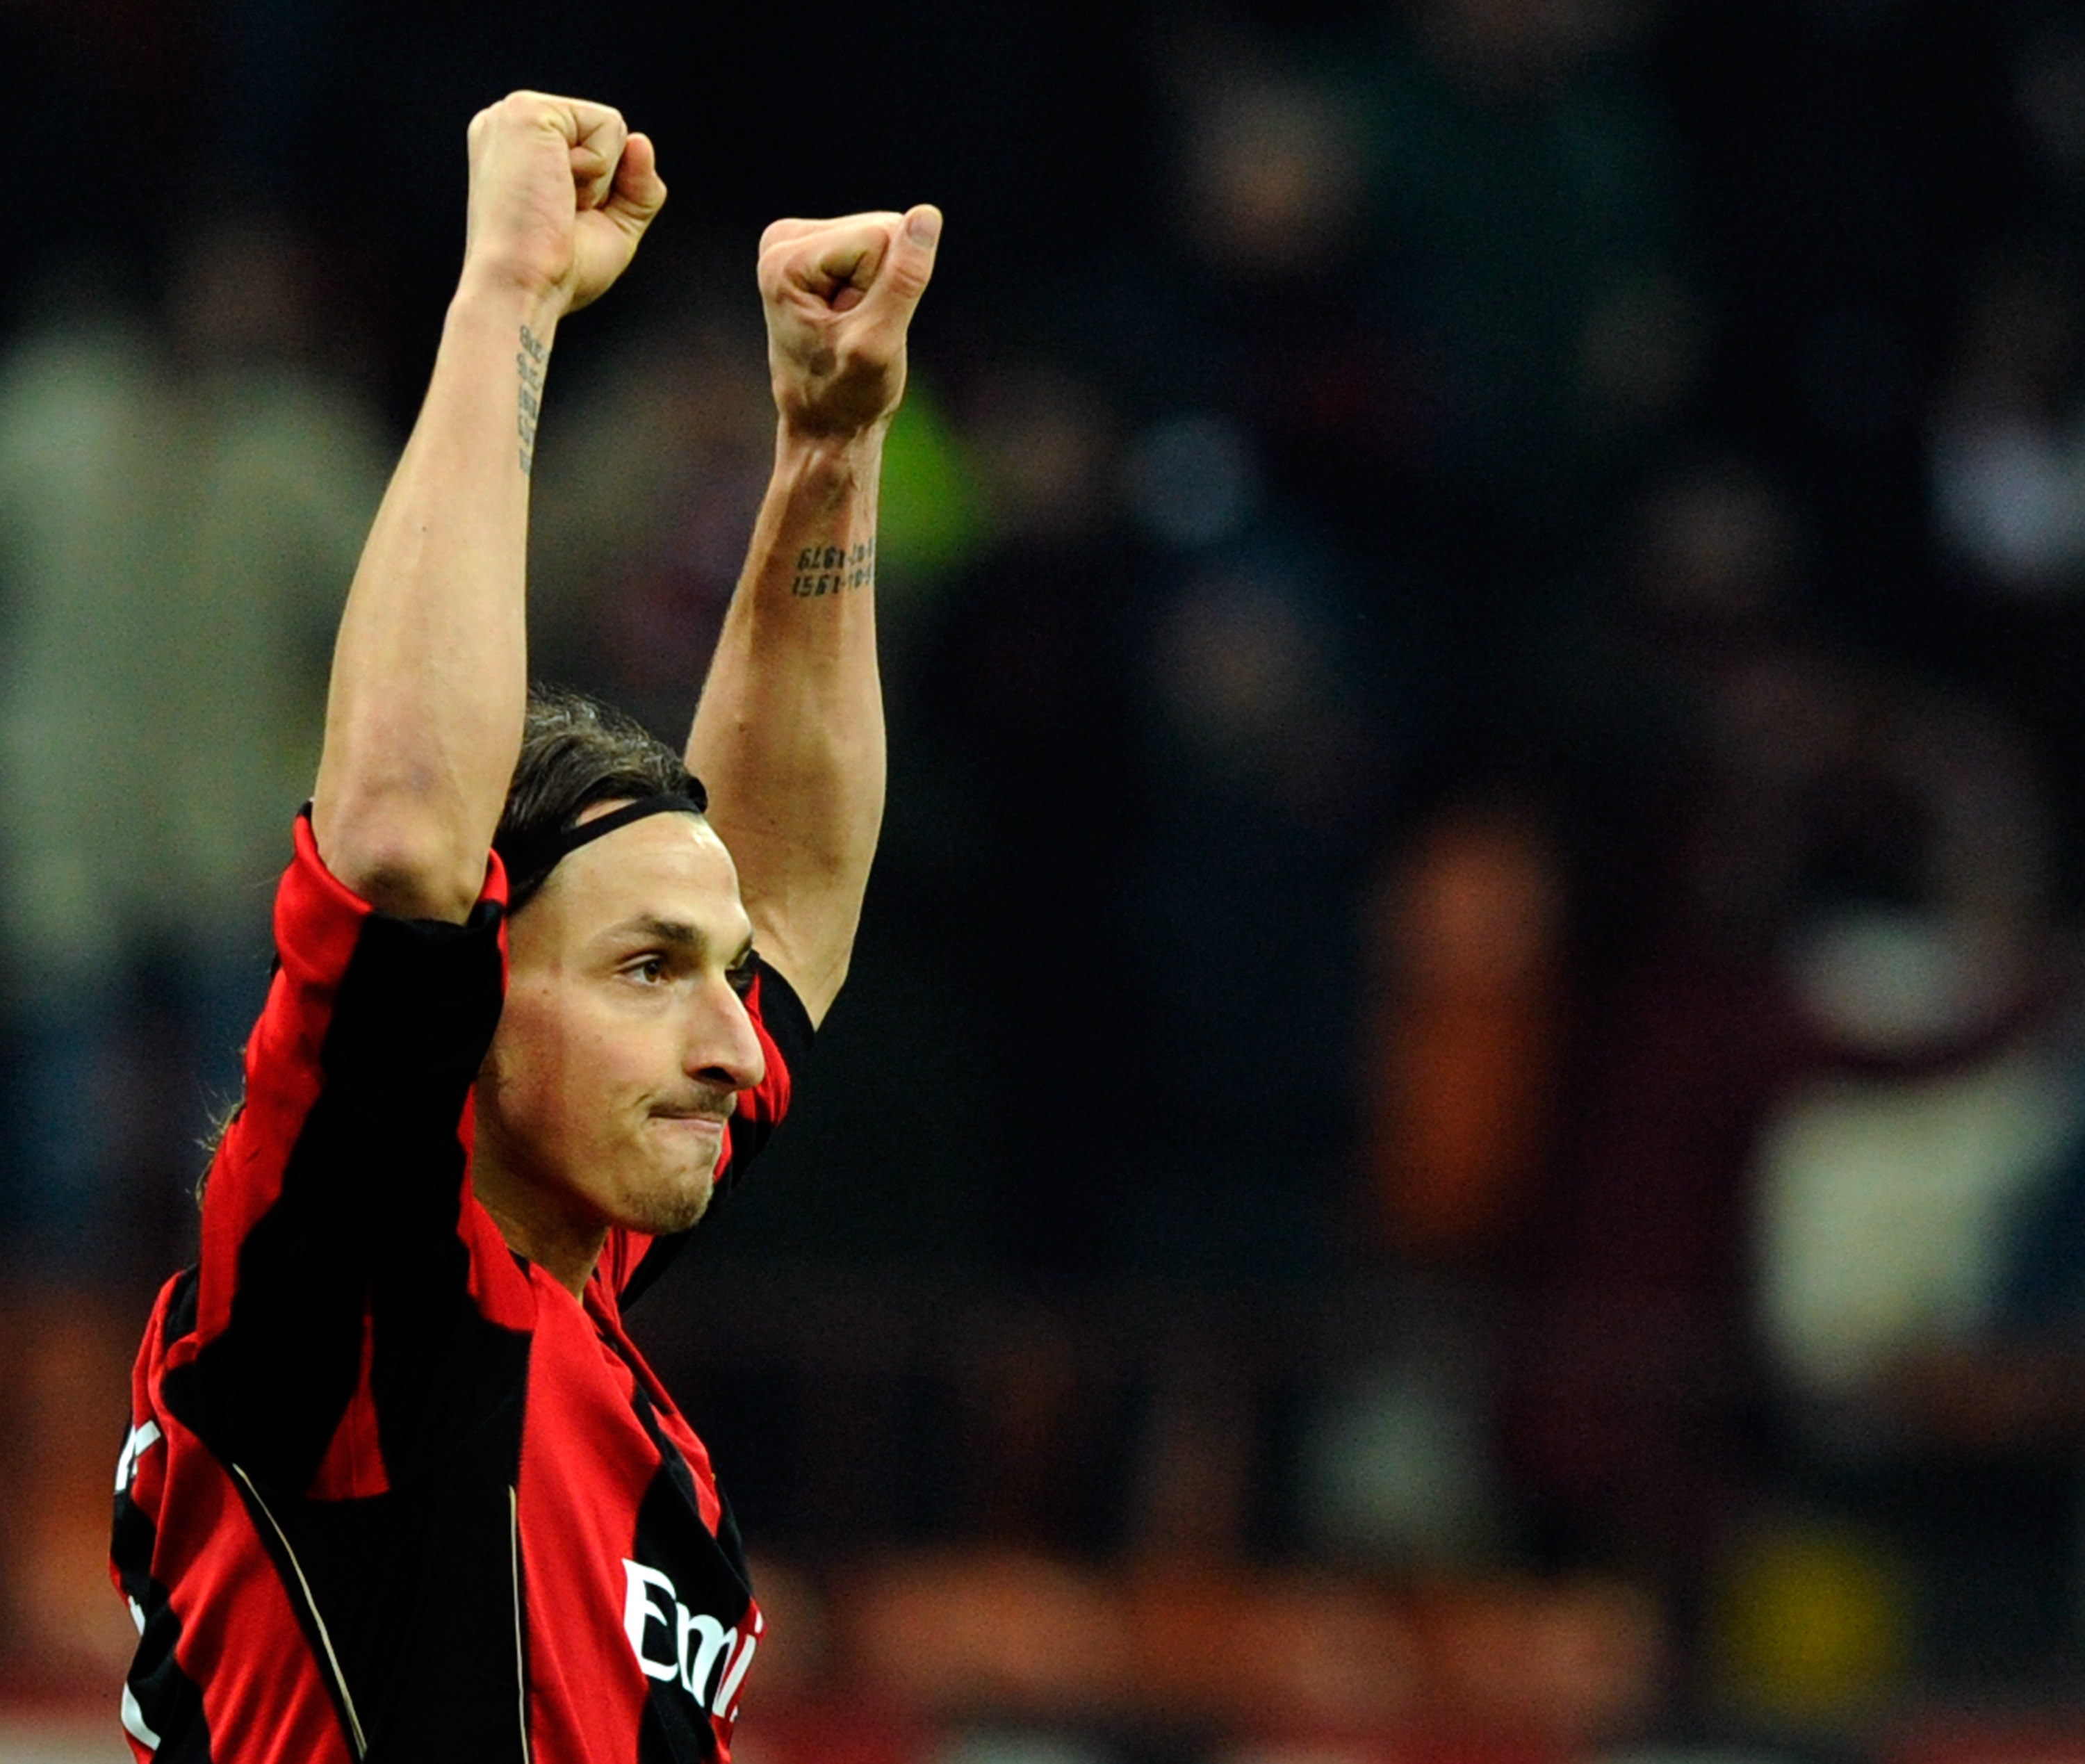 MILAN, ITALY - DECEMBER 04:  Zlatan Ibrahimovic of AC Milan celebrates scoring the third goal during the Serie A match between Milan and Brescia at Stadio Giuseppe Meazza on December 4, 2010 in Milan, Italy.  (Photo by Claudio Villa/Getty Images)